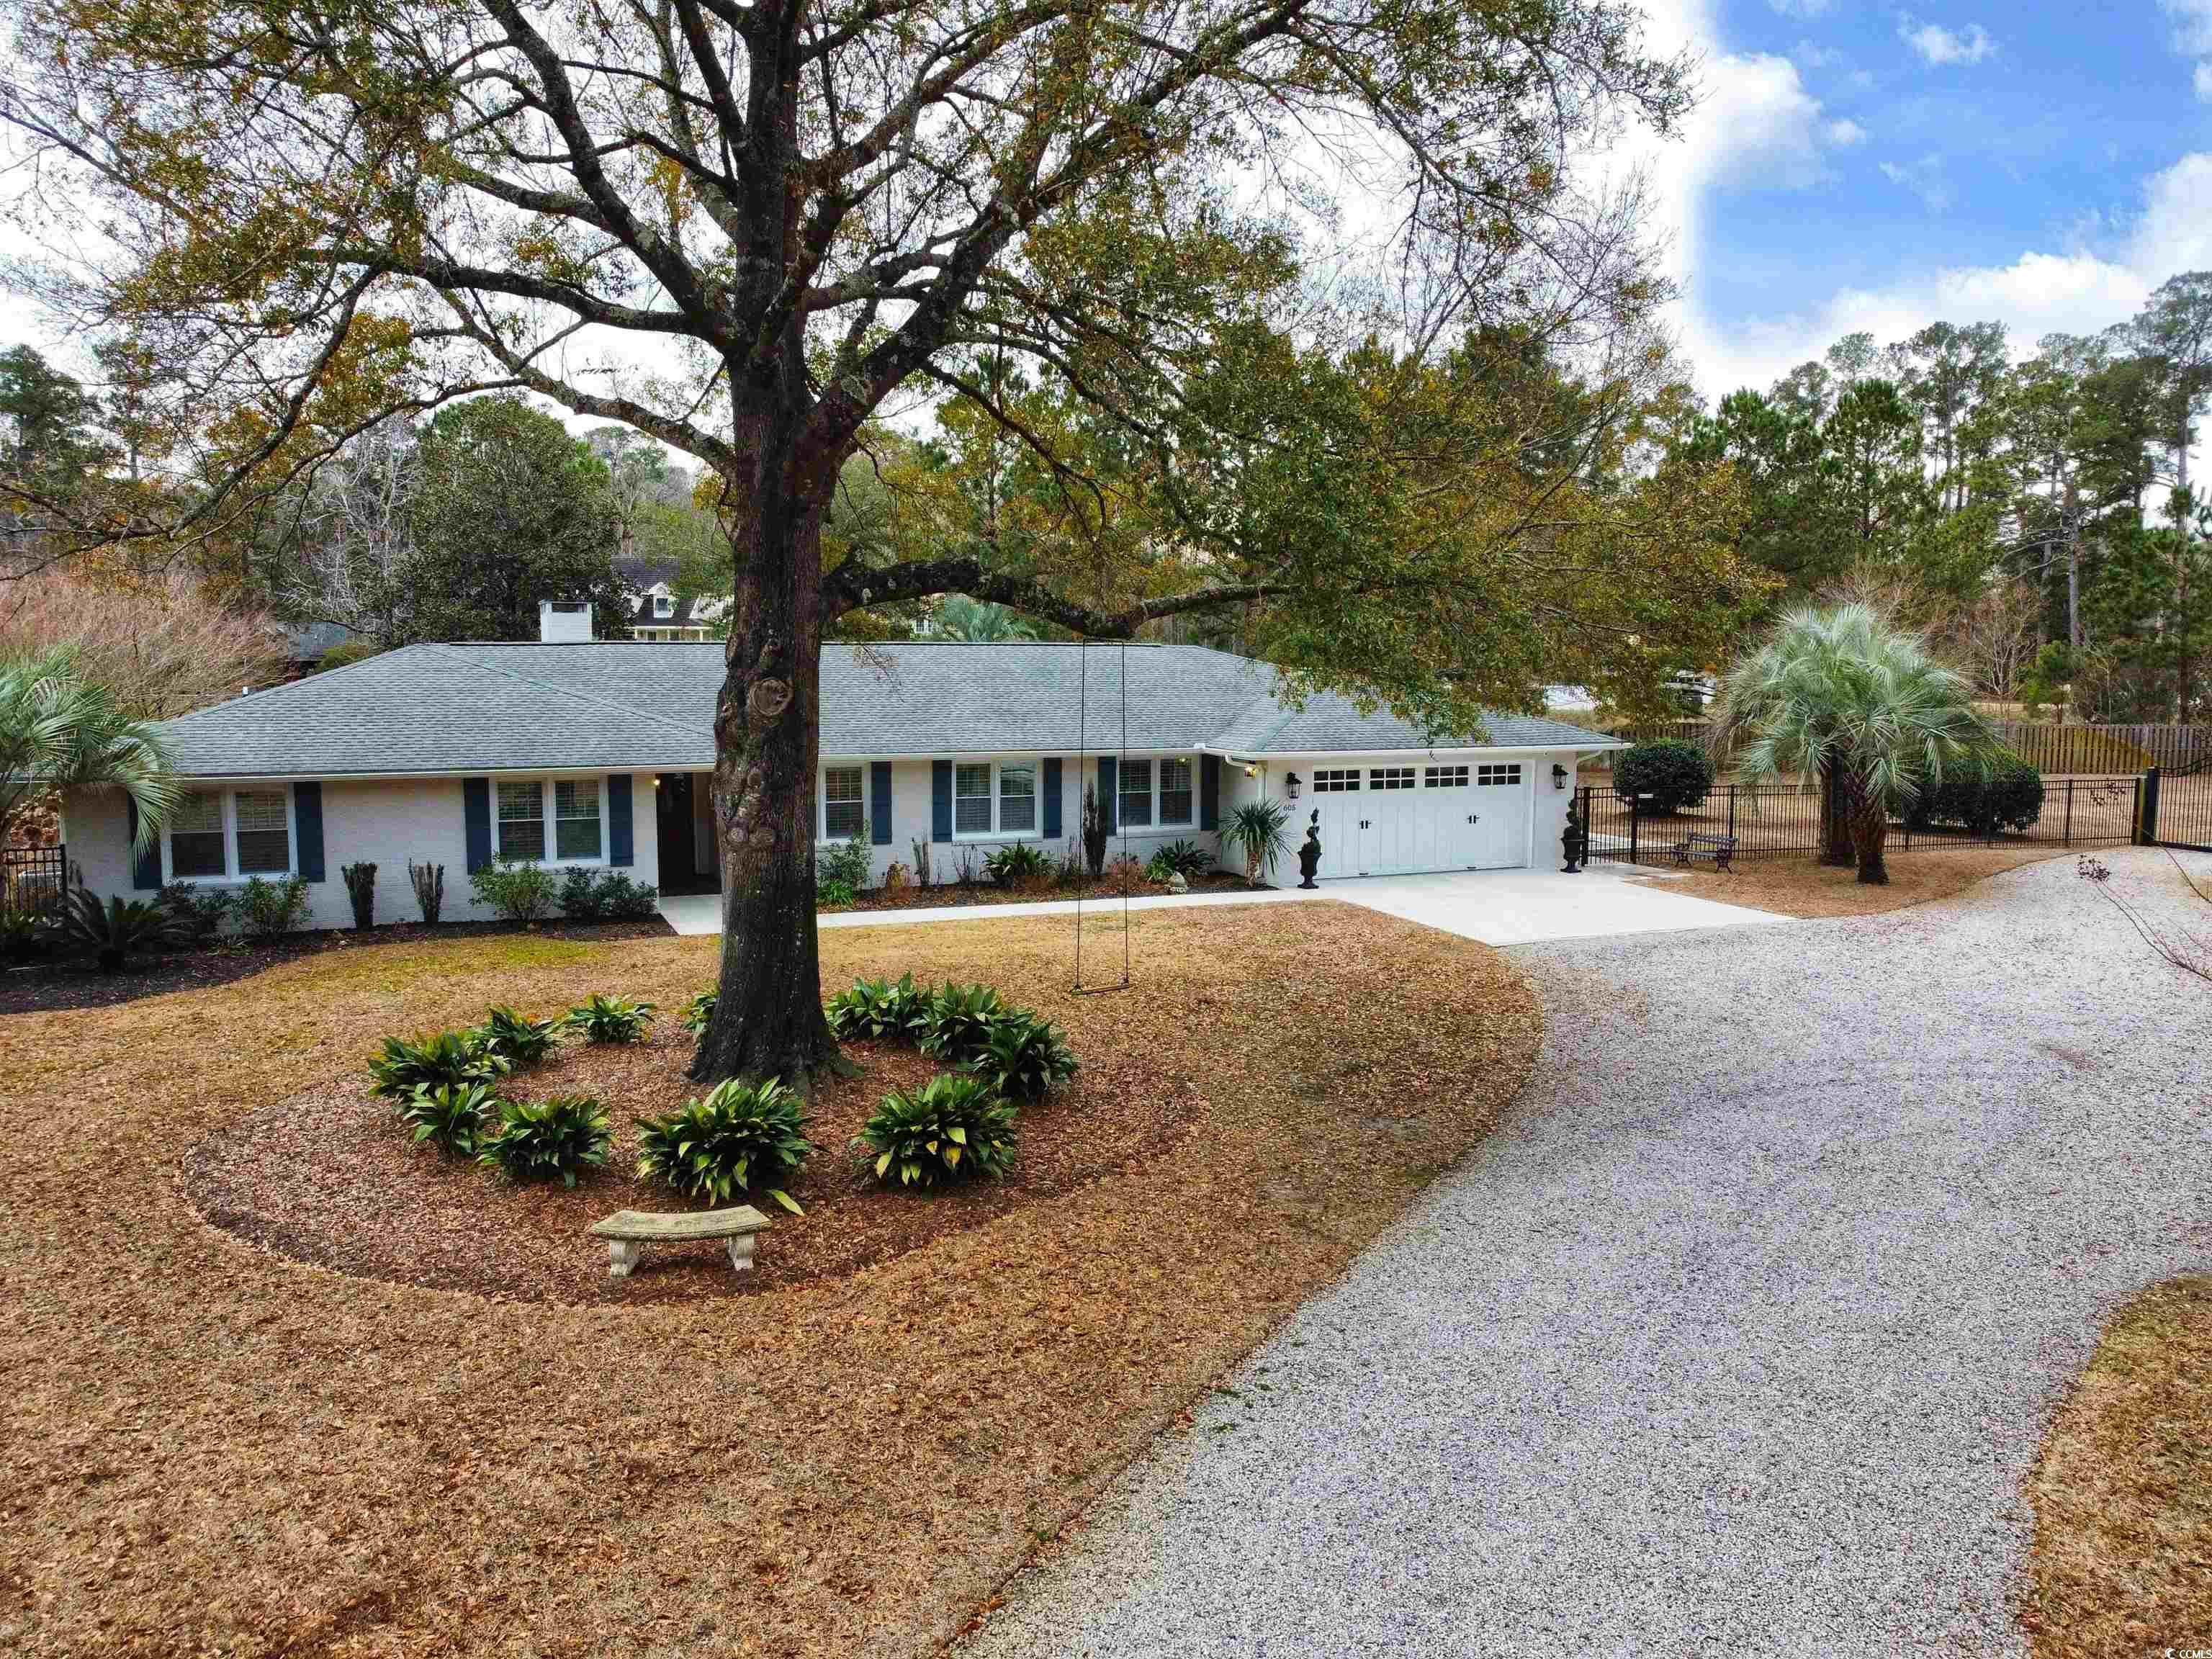 very well maintained and updated brick ranch home located on 1.13 acres in the heart of pawleys island, sc.  you will immediately notice the pride of ownership as you drive up.  plenty of room for your toys and space to add additional storage structures or even your very own pool.  this 4 bedroom, 3 1/2 bathroom home flows well from the moment you walk through the front door.  large great room and adjoining dinning room.  updated kitchen with granite countertops, brick backsplash, stainless steel appliances, large work island with breakfast bar and built-in wine rack and wine cooler, plenty of cabinets and pantry space as well.  living room off of kitchen.  large master bedroom with dual walk-in closets and sliding door access to the backyard.  master bathroom with tiled shower and separate sink areas.  en-suite bedroom with recently renovated bathroom with granite counter tops, new faucet hardware, and a tiled shower.  bedroom also accesses the back patio through sliding glass doors.  2 additional bedrooms for your guests or a home office.  3rd full bathroom was recently renovated with granite counter tops, new faucet hardware, a tiled shower as well.  sellers have recently installed one new hvac, a tankless water heater (propane), and a halo 5 water filtration system.  interior was recently painted and additional plantation shutters were installed in most areas of the home.  spray foam insulation added in the entire attic to help with energy efficiency.  other features to include lvp flooring, ceiling fans with lights in all bedrooms and screened-in porch (12x18) with views of the back yard, pond, and golf course.  brick pavers in the back yard patio areas and a firepit to enjoy on the cooler nights.  605 brace drive is minutes from the boat landing on hagley drive and a short drive to the beaches of pawleys island.  home is convenient to area shopping, dining, night life, and many area championship golf courses.  8 miles to georgetown, 20 miles to myrtle beach, and 70 miles to historic charleston.  make your appointment today and don't miss out on this amazing home and property!